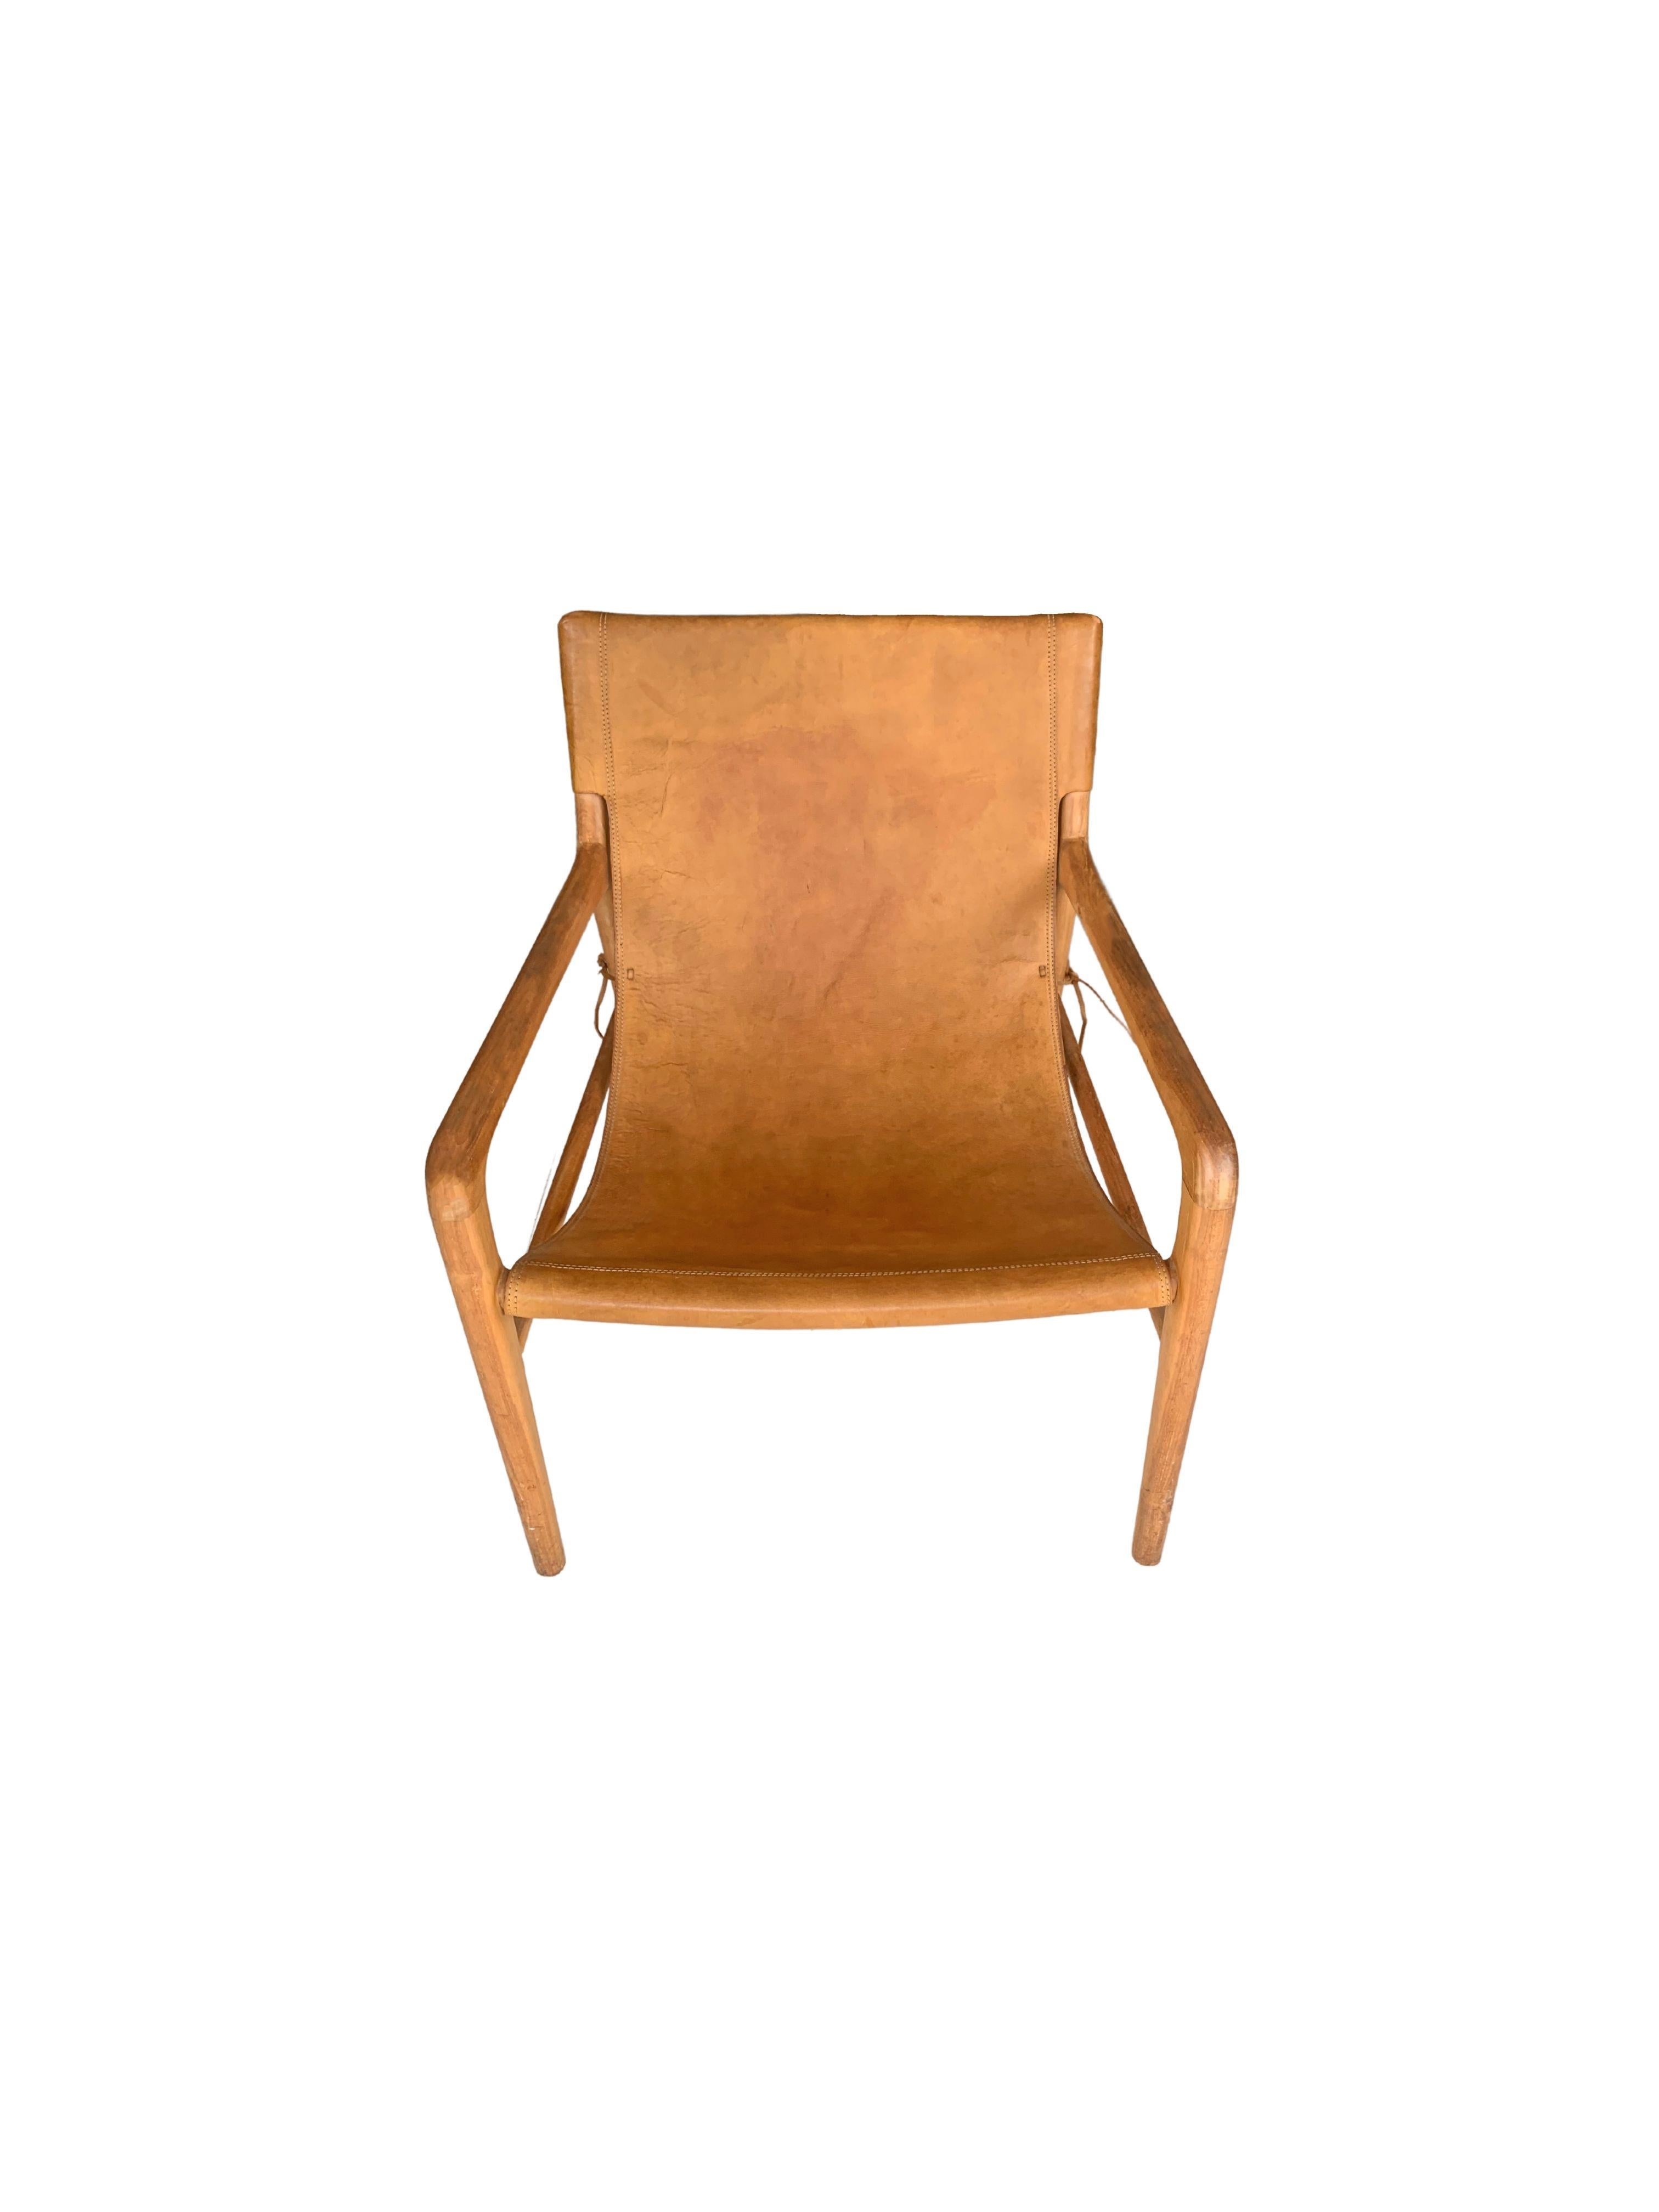 A hand-crafted teak framed & hanging leather seat lounger chair. These chairs are crafted by local artisans using a wood joinery technique without the use of nails. They feature a subtle wood texture and are robust and sturdy.